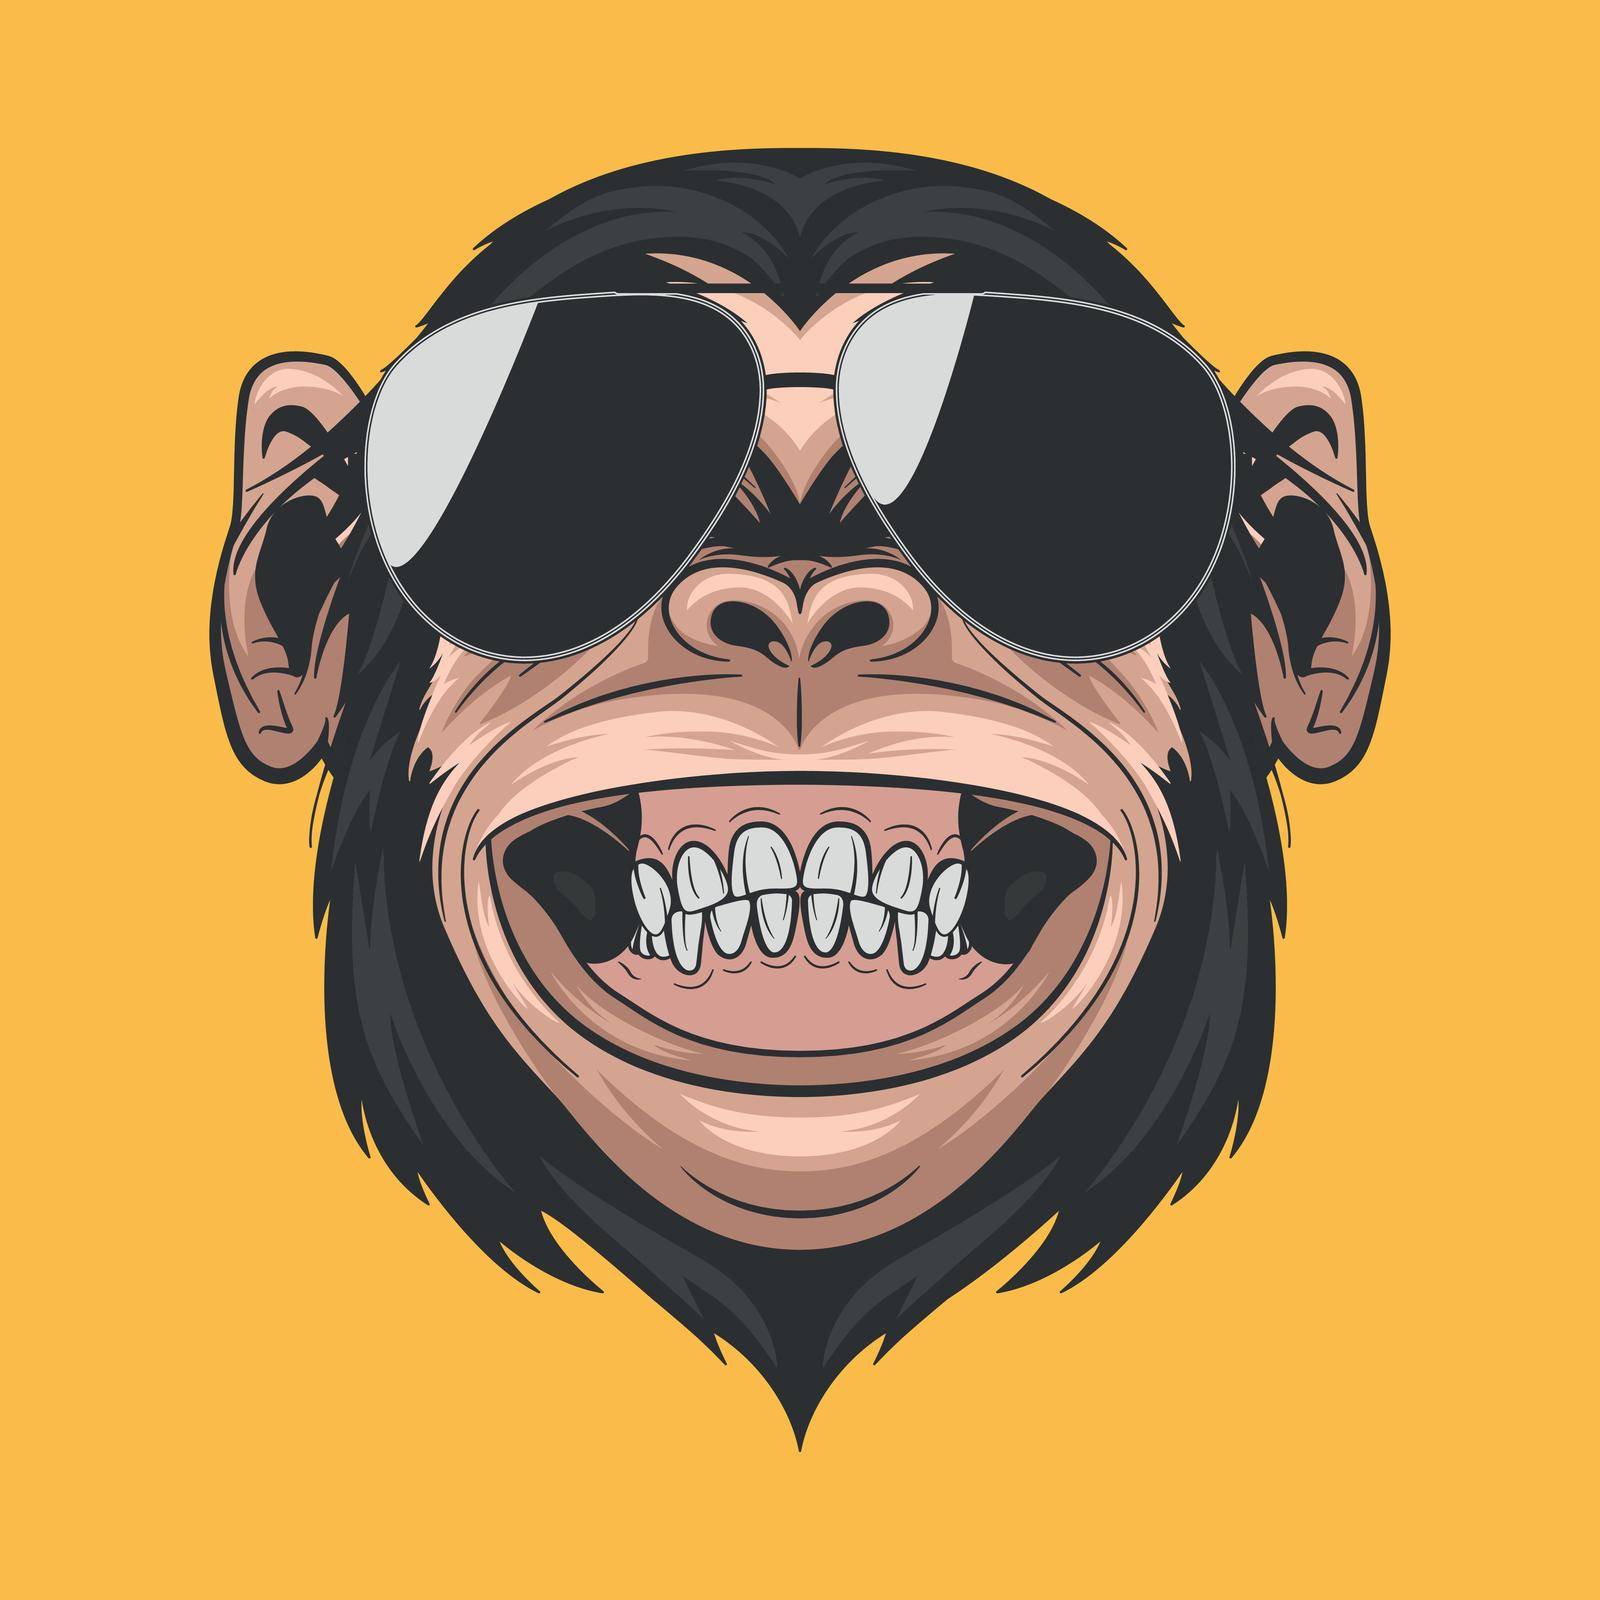 Vector Hand Drawn Smiling Chimpanzee Ape with Sunglasses. Colored Abstract Funny Monkey Head for Wall Art, T-shirt Print, Poster. Cartoon Cute Chimp Monkey Icon, Logo, Illustration.